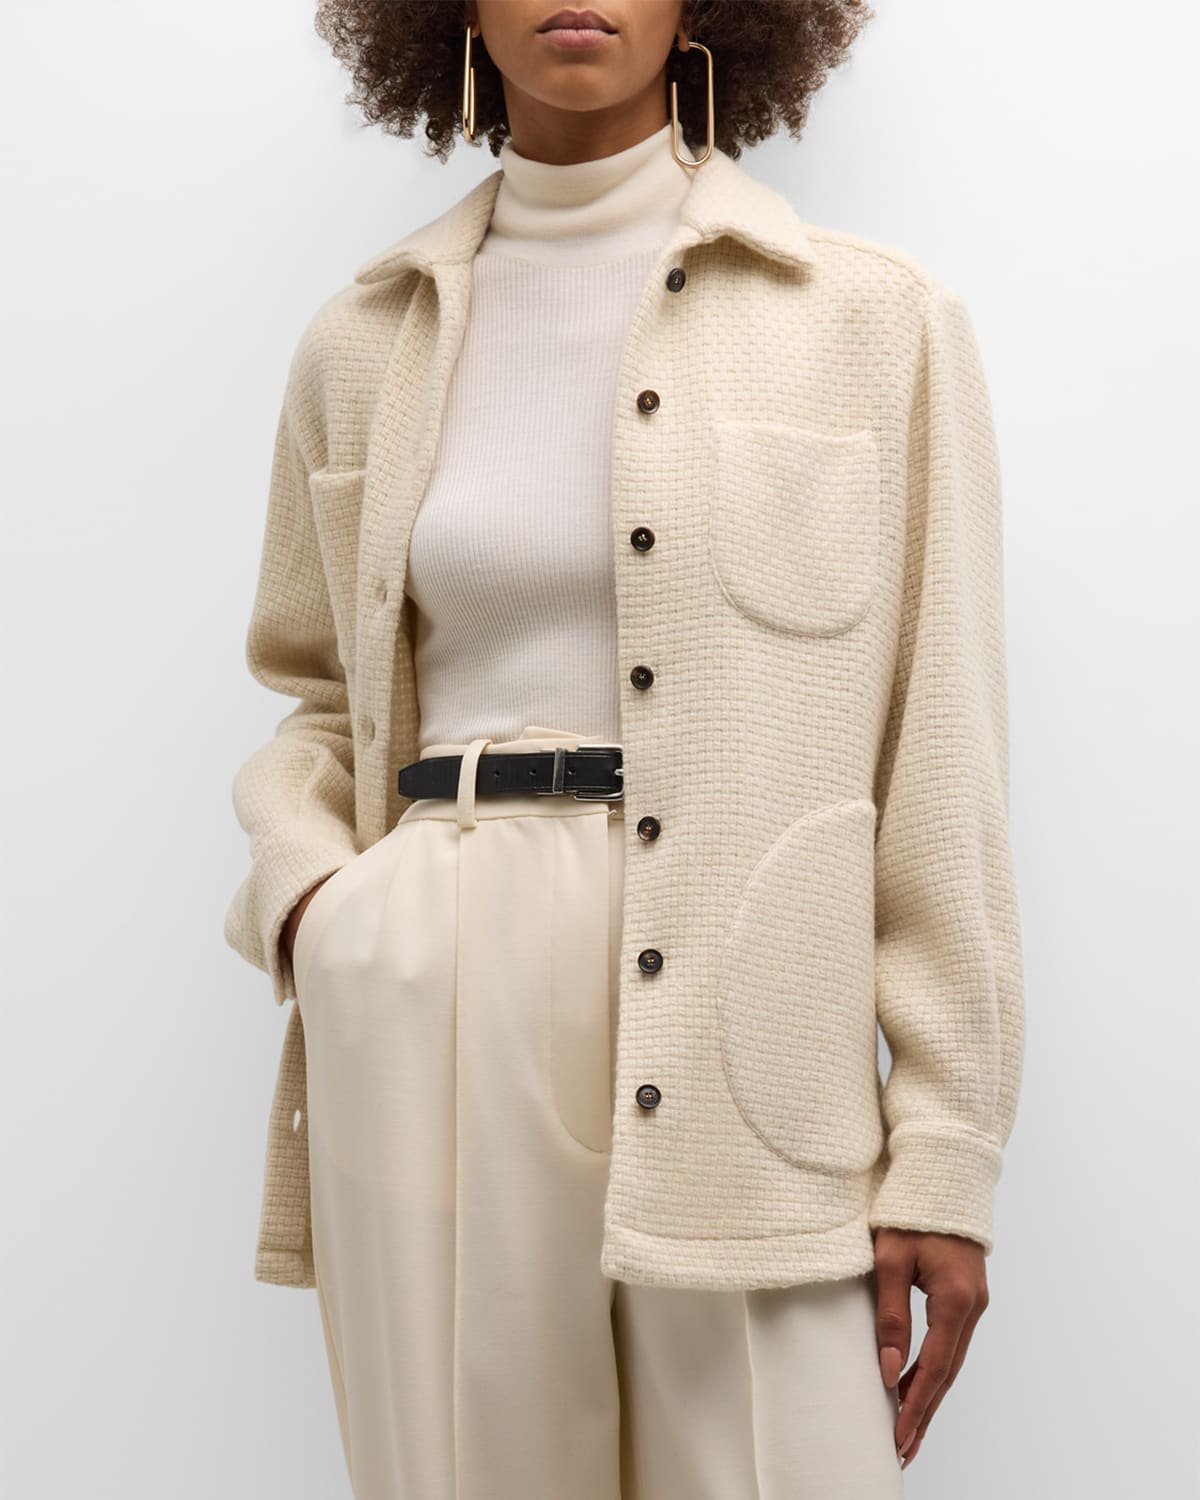 Kiton Woven Cashmere Knit Overshirt Coat In Cream